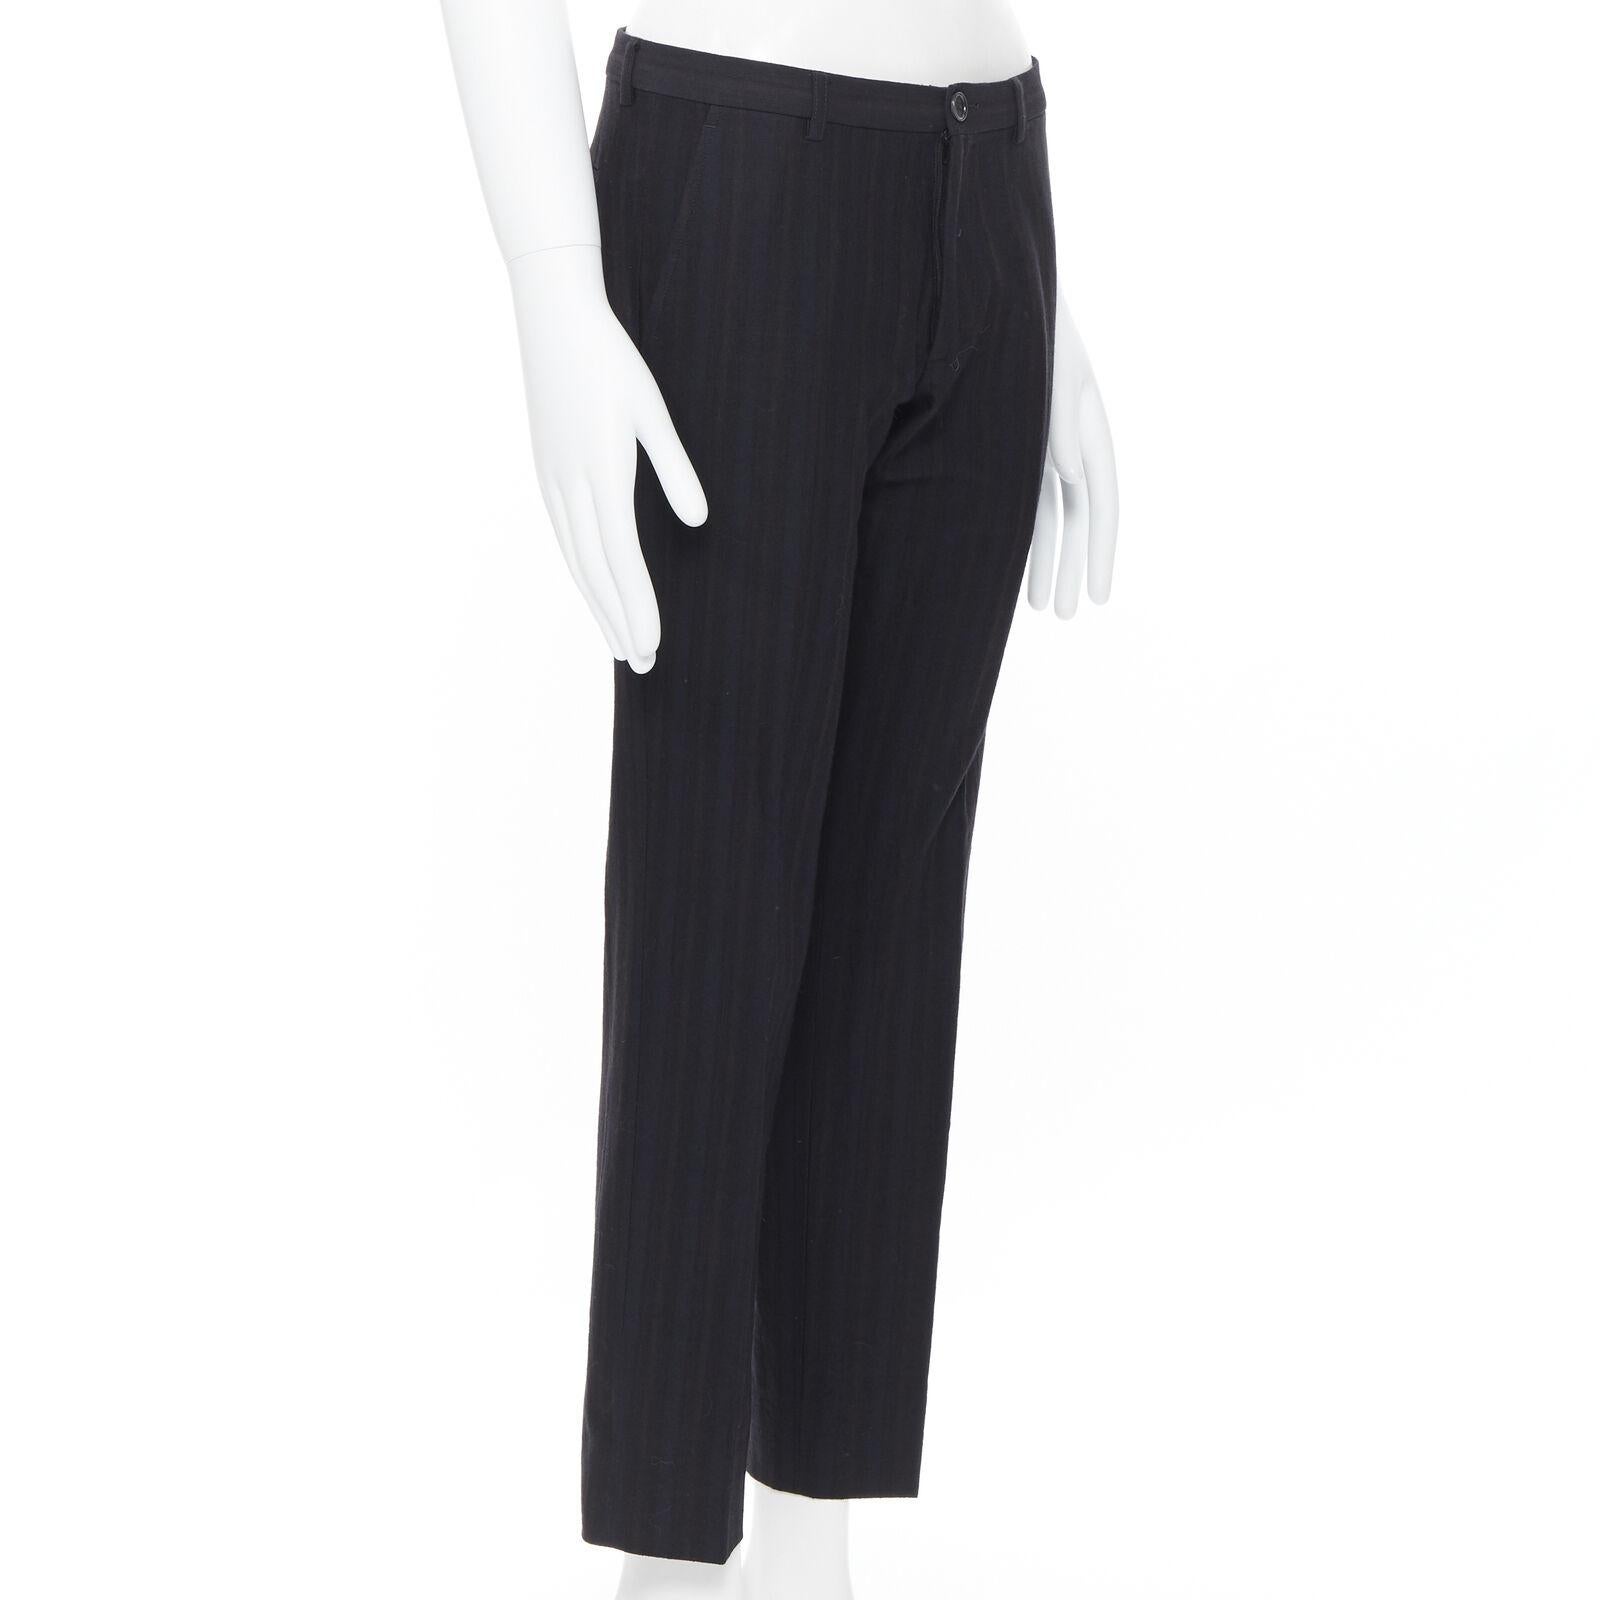 LANVIN ALBER ELBAZ mohair wool black satin side trimmed tuxedo trousers FR44 In Excellent Condition For Sale In Hong Kong, NT